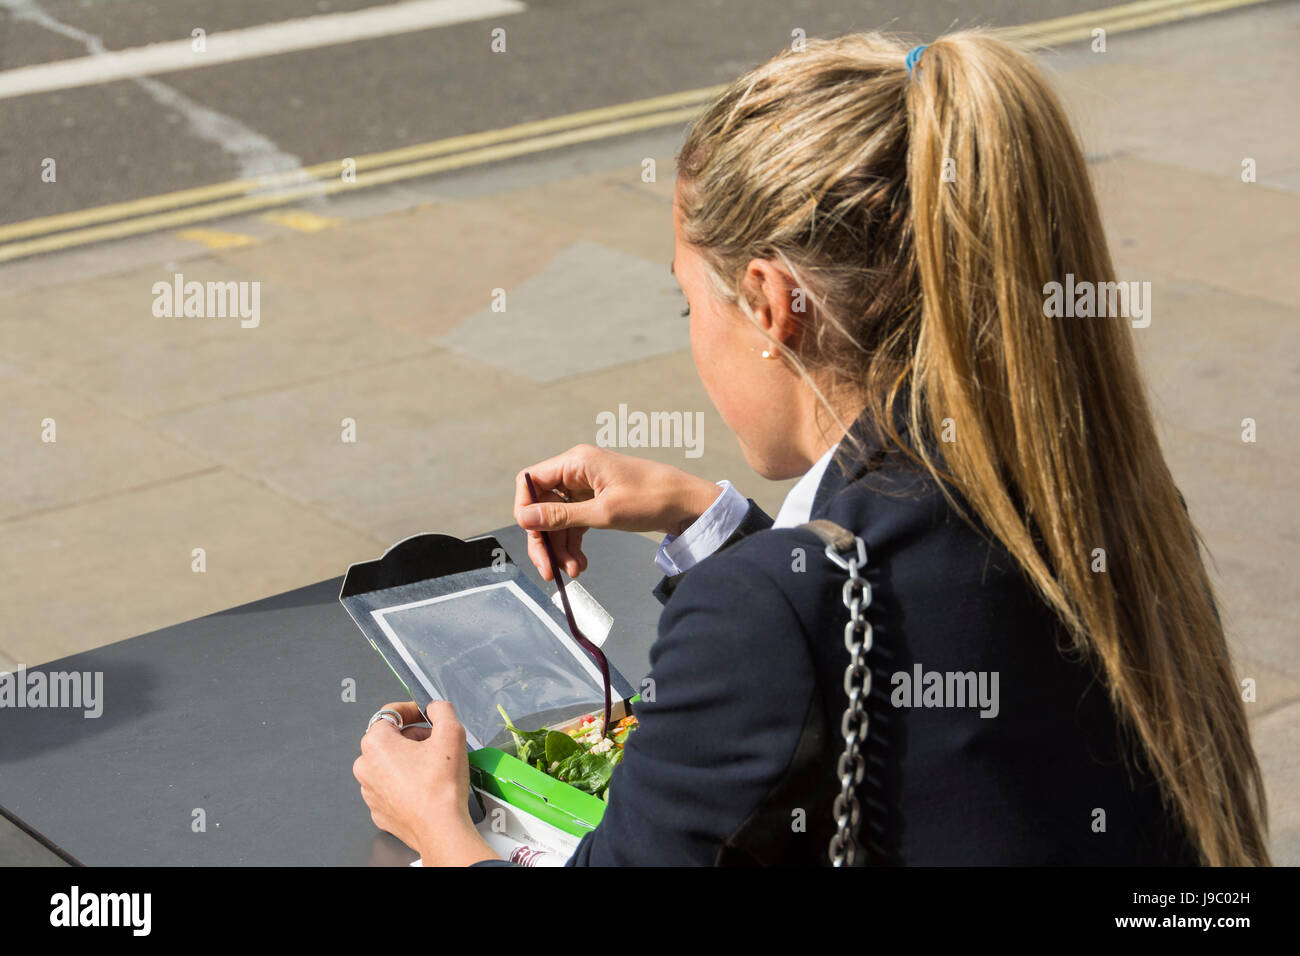 A young woman eating a healthy snack by herself Stock Photo